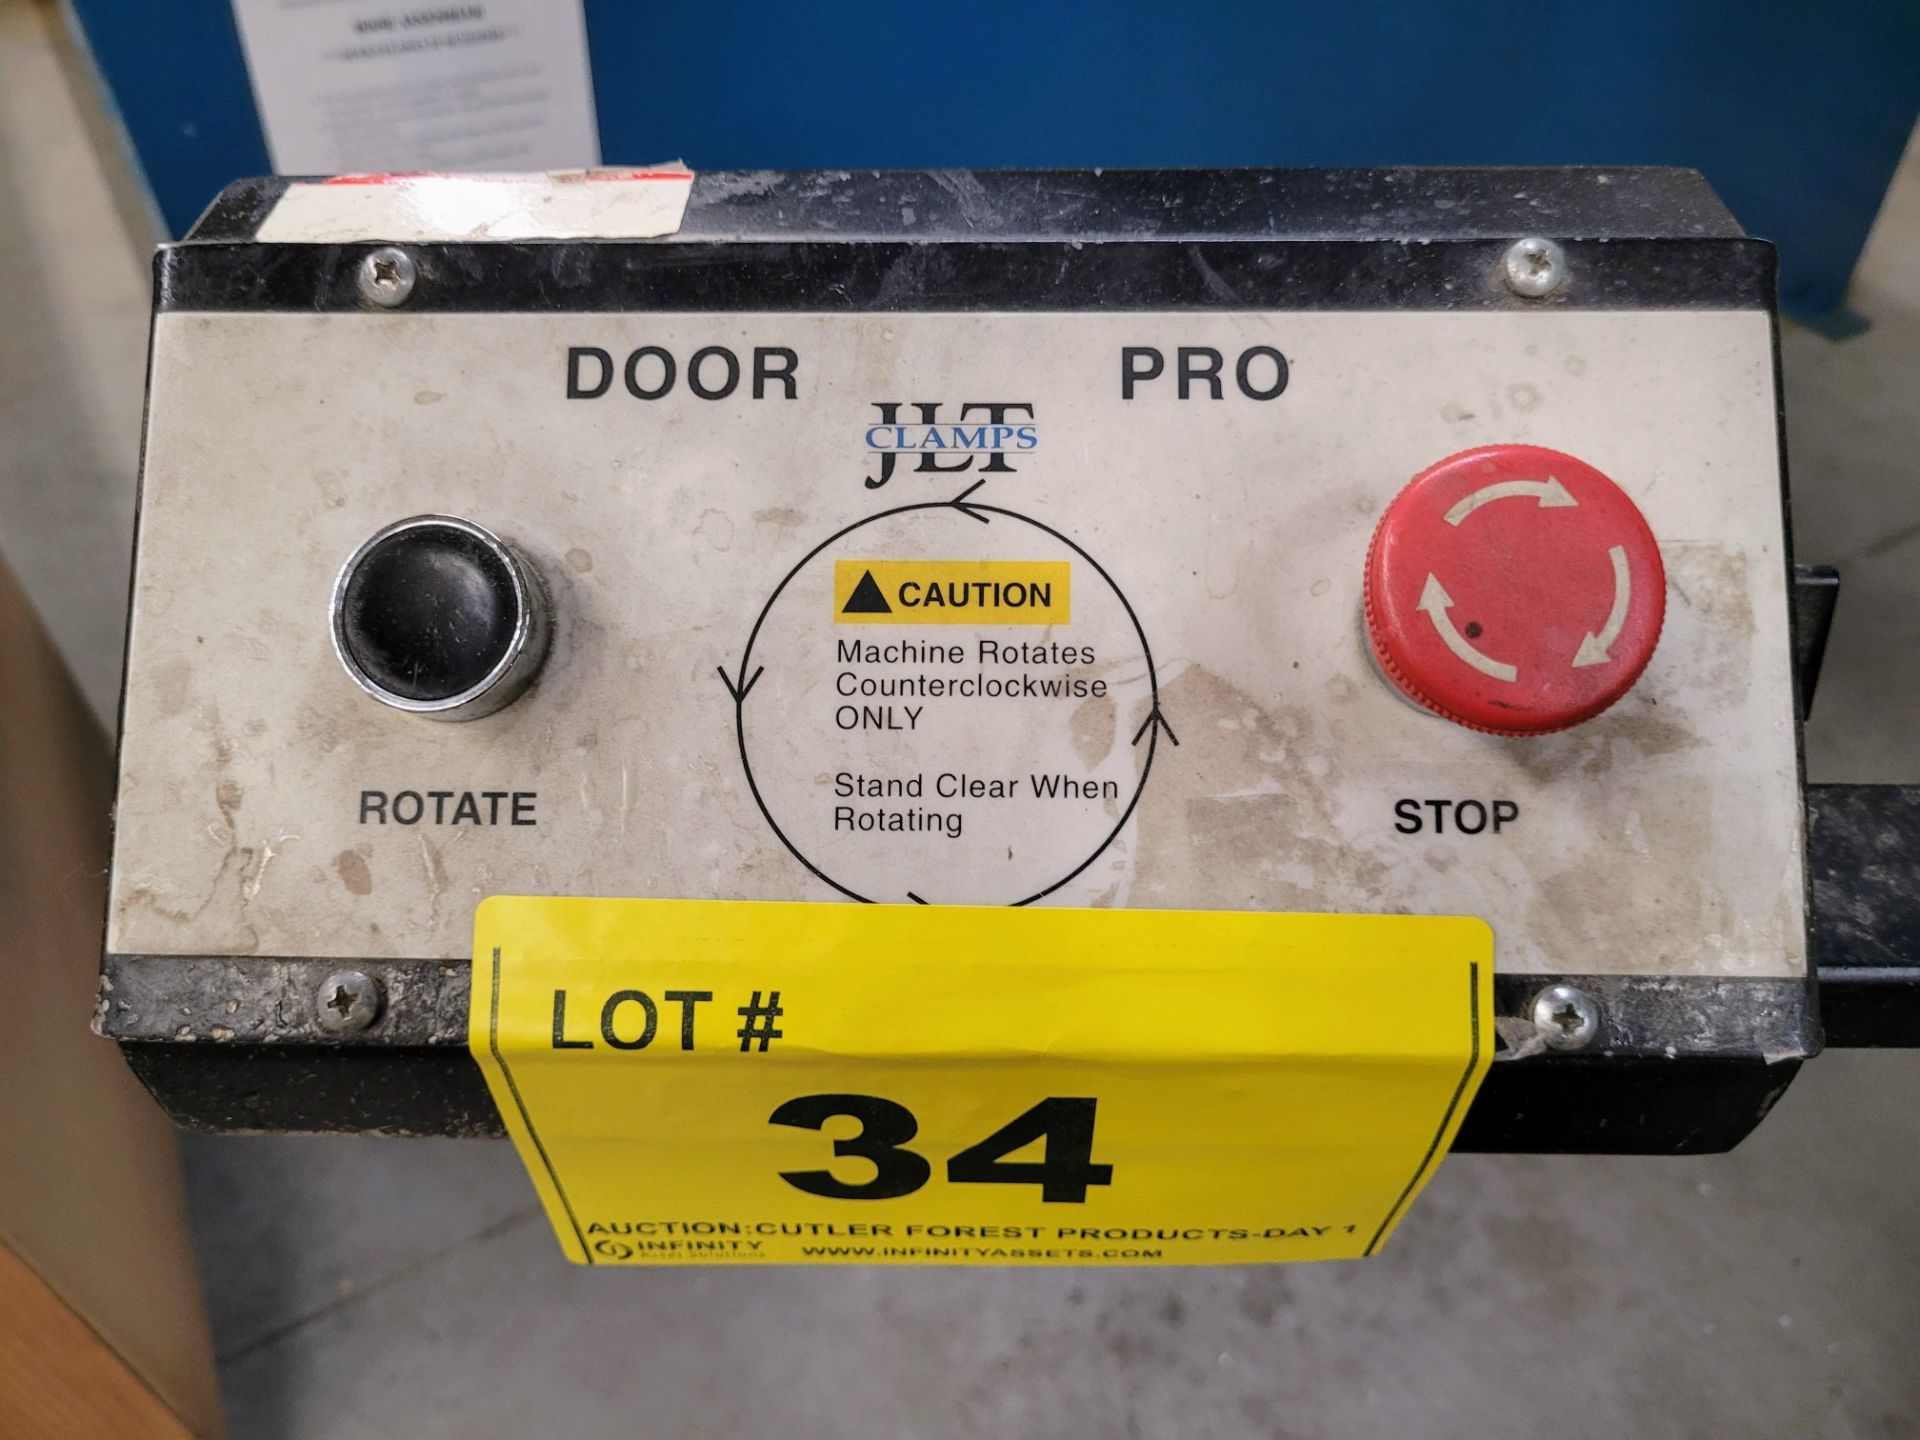 2011 CAMERON AUTOMATION 79X-5-LM 5-ARM PNEUMATIC DOOR CLAMP, S/N 79X5-LM-M1 - Image 4 of 4